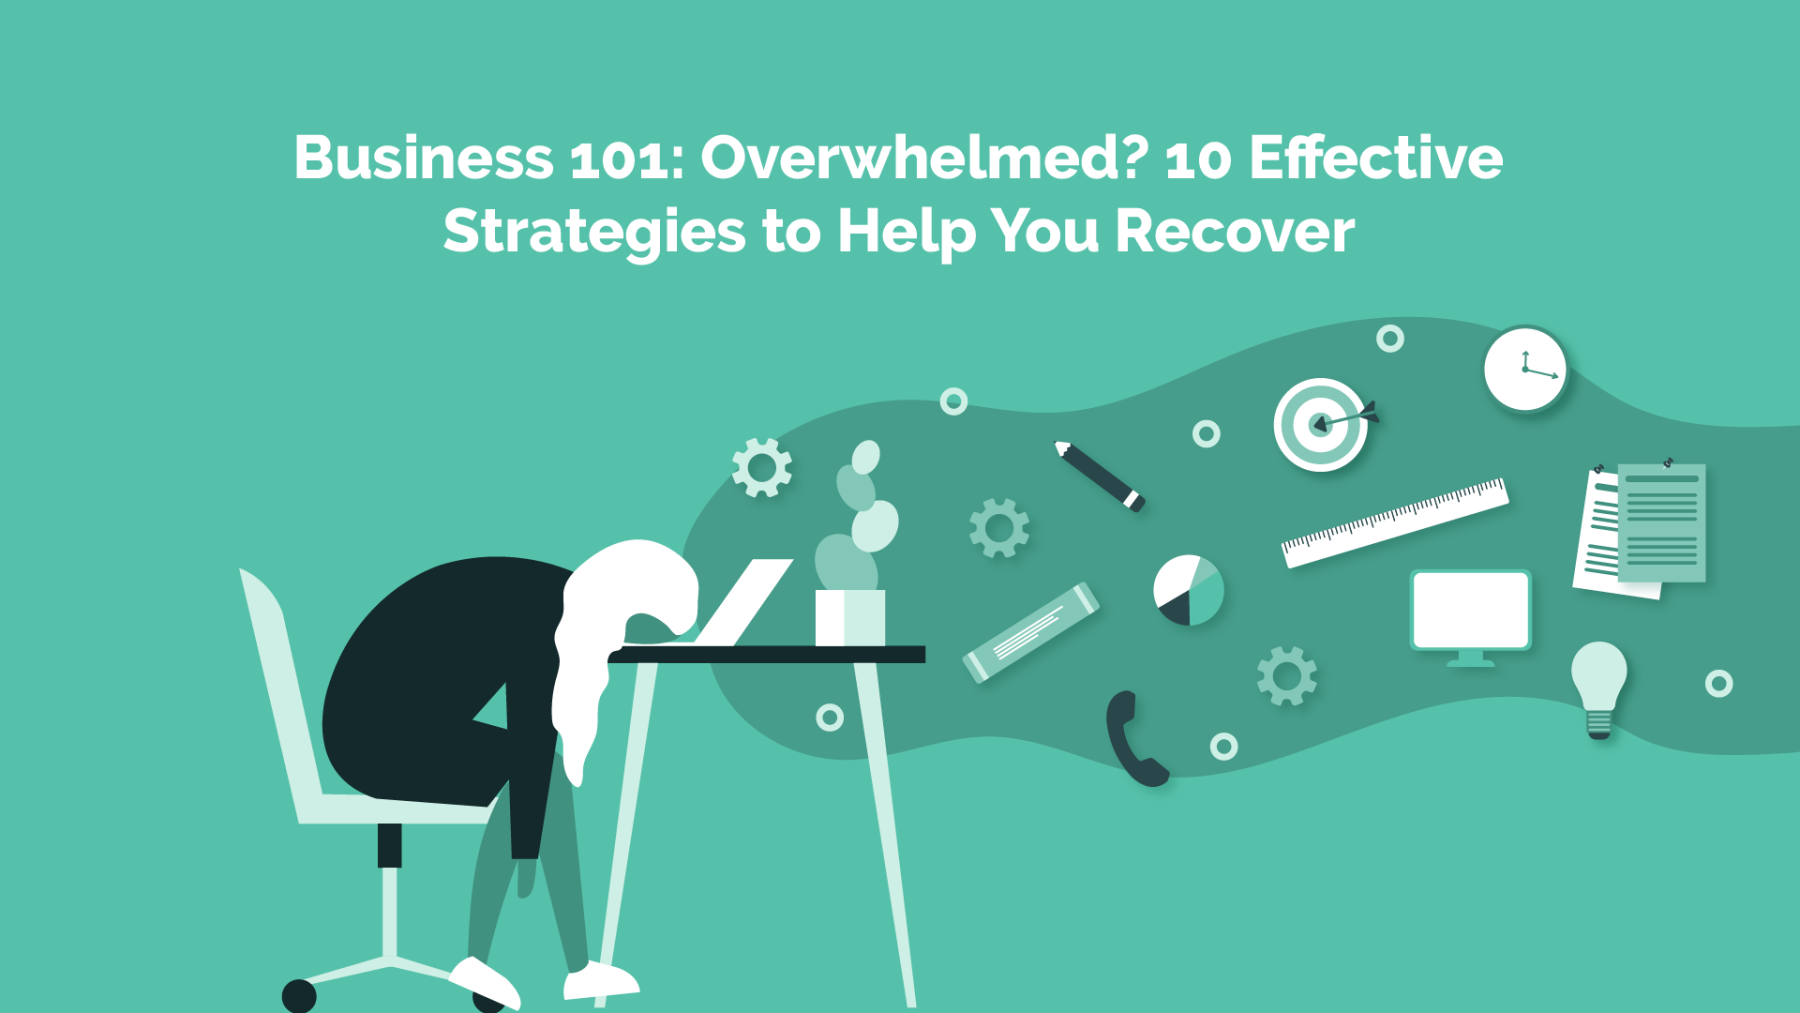 20220120.fya_.Business-101-Overwhelmed-10-Effective-Strategies-to-Help-You-Recover.0